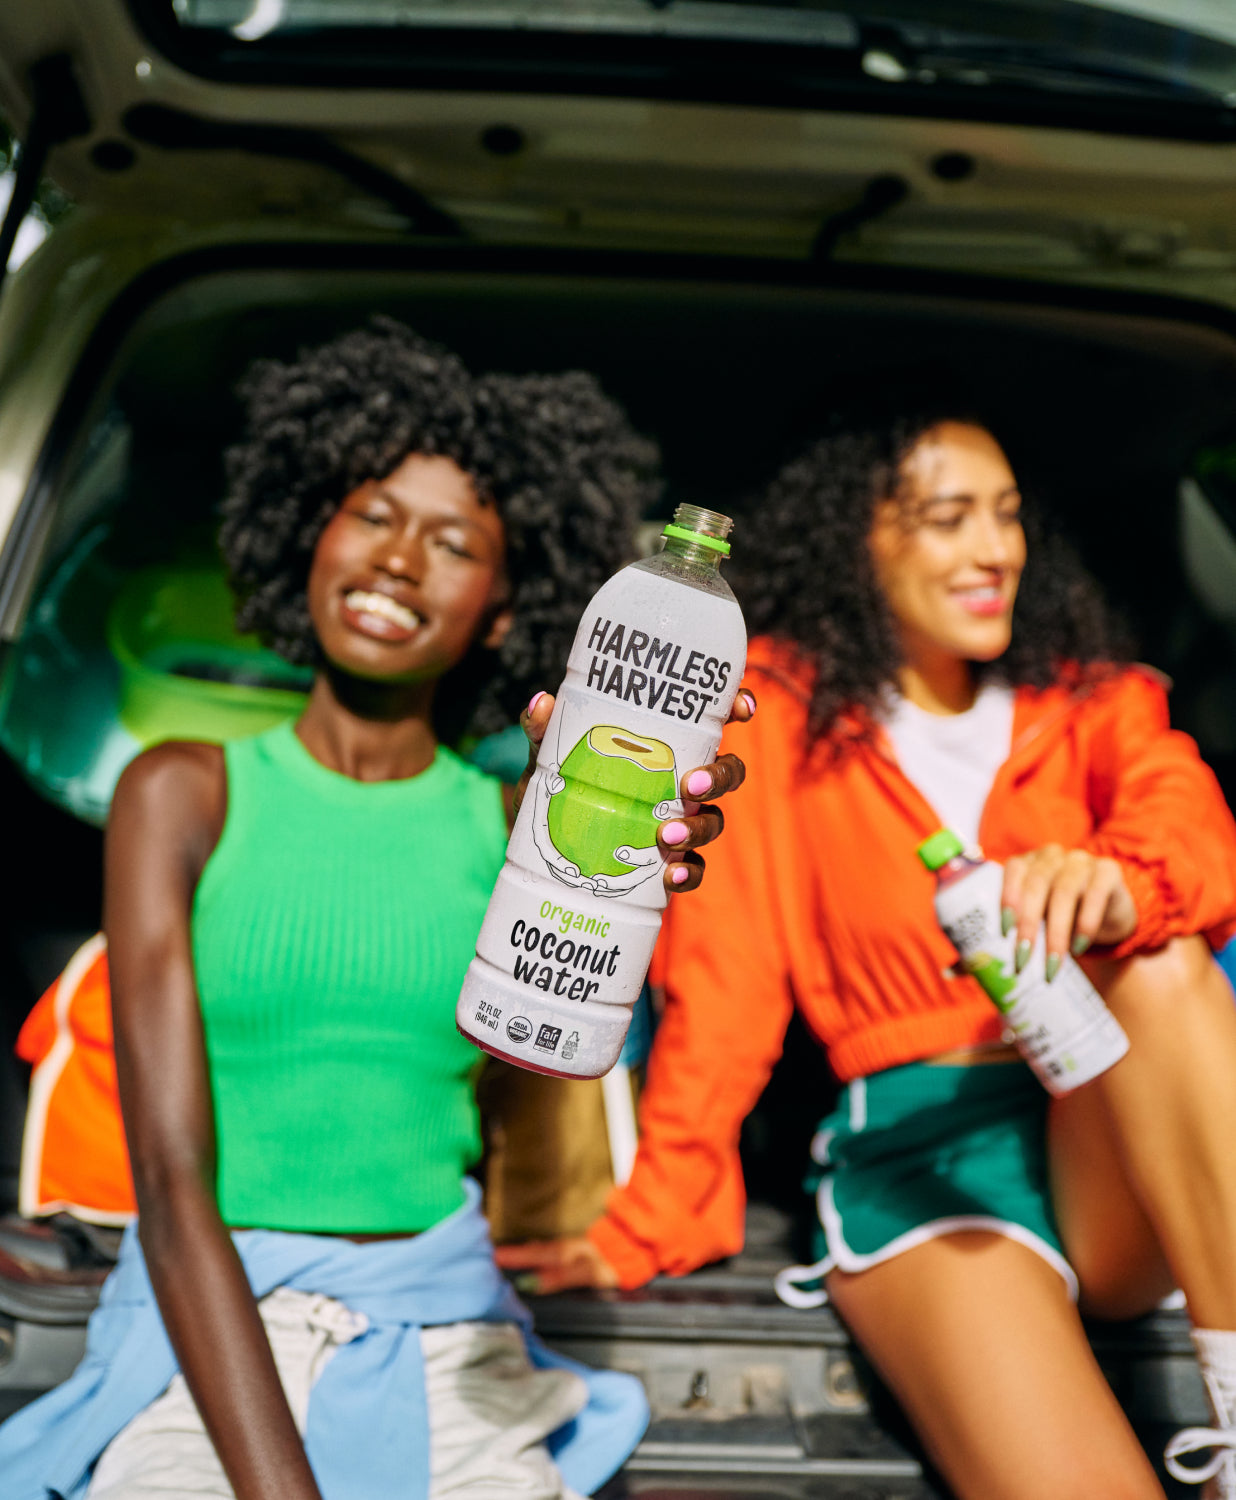 Two people drinking Harmless Harvest Organic Coconut Water in the back of a car.